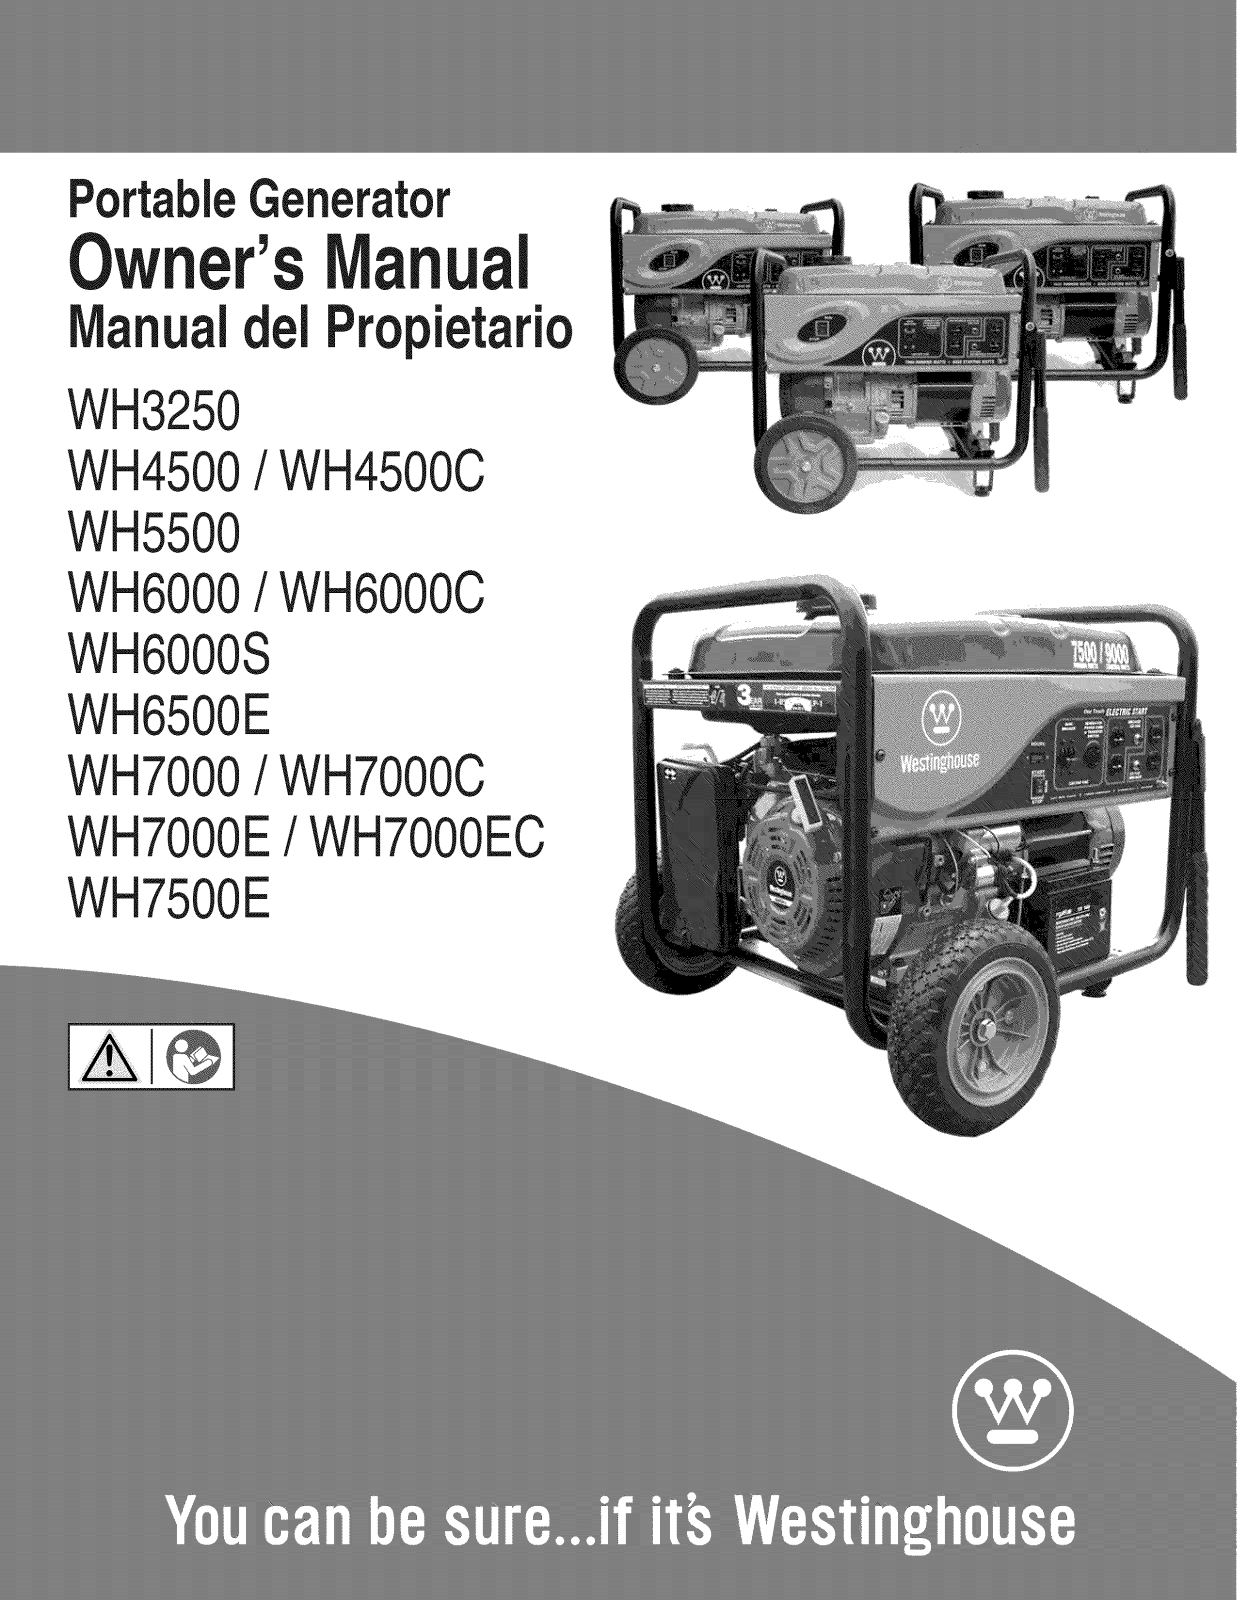 White-Westinghouse WH4500, WH7000E, WH7000, WH6000 Owner’s Manual